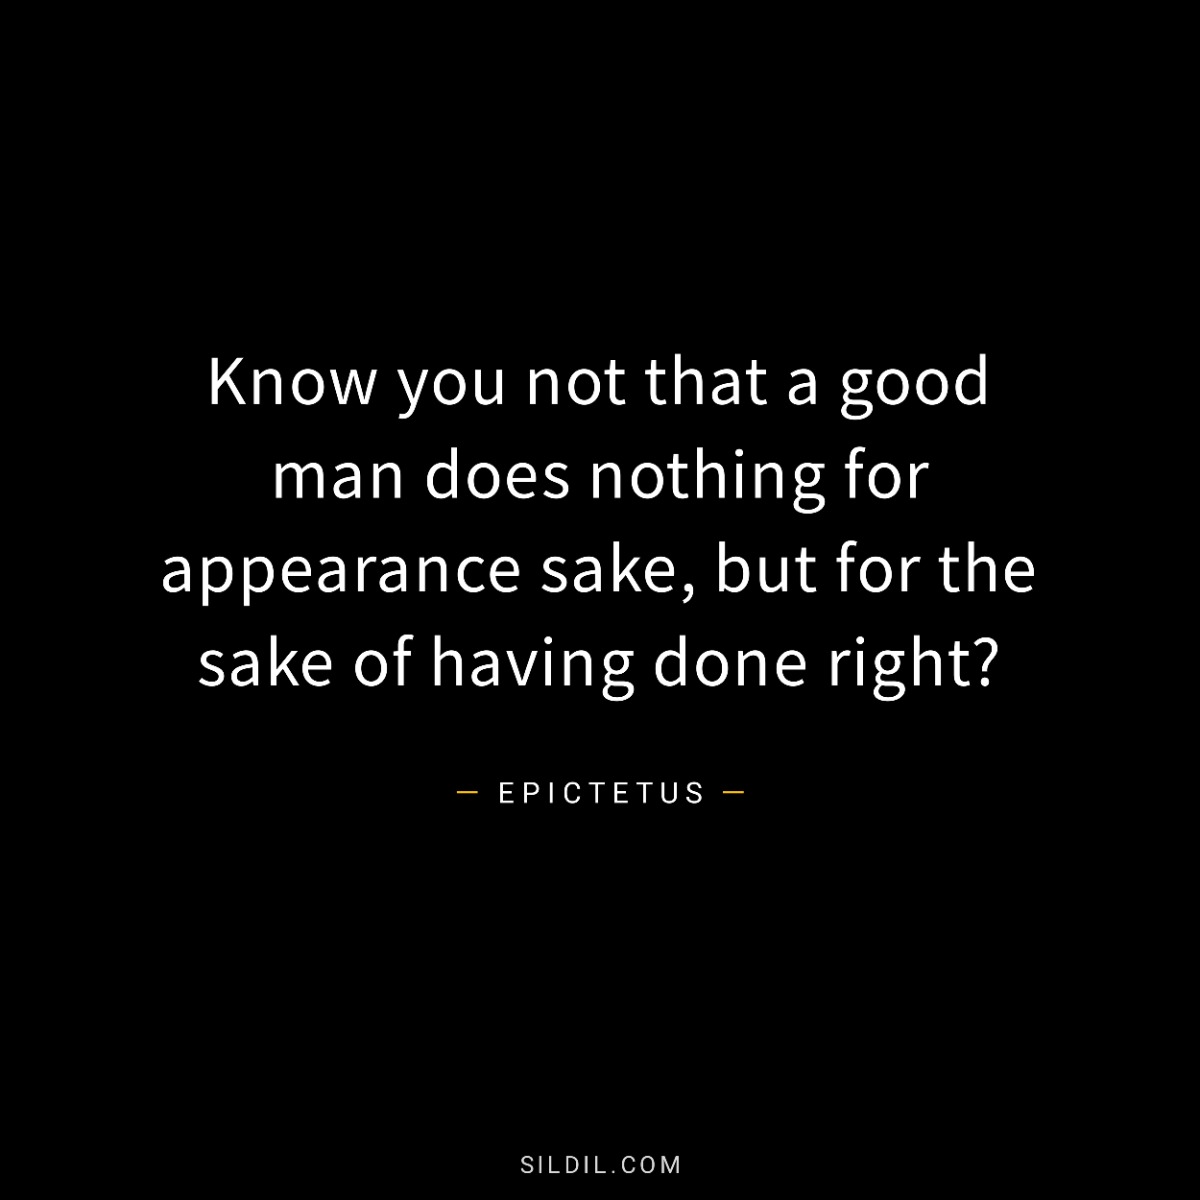 Know you not that a good man does nothing for appearance sake, but for the sake of having done right?